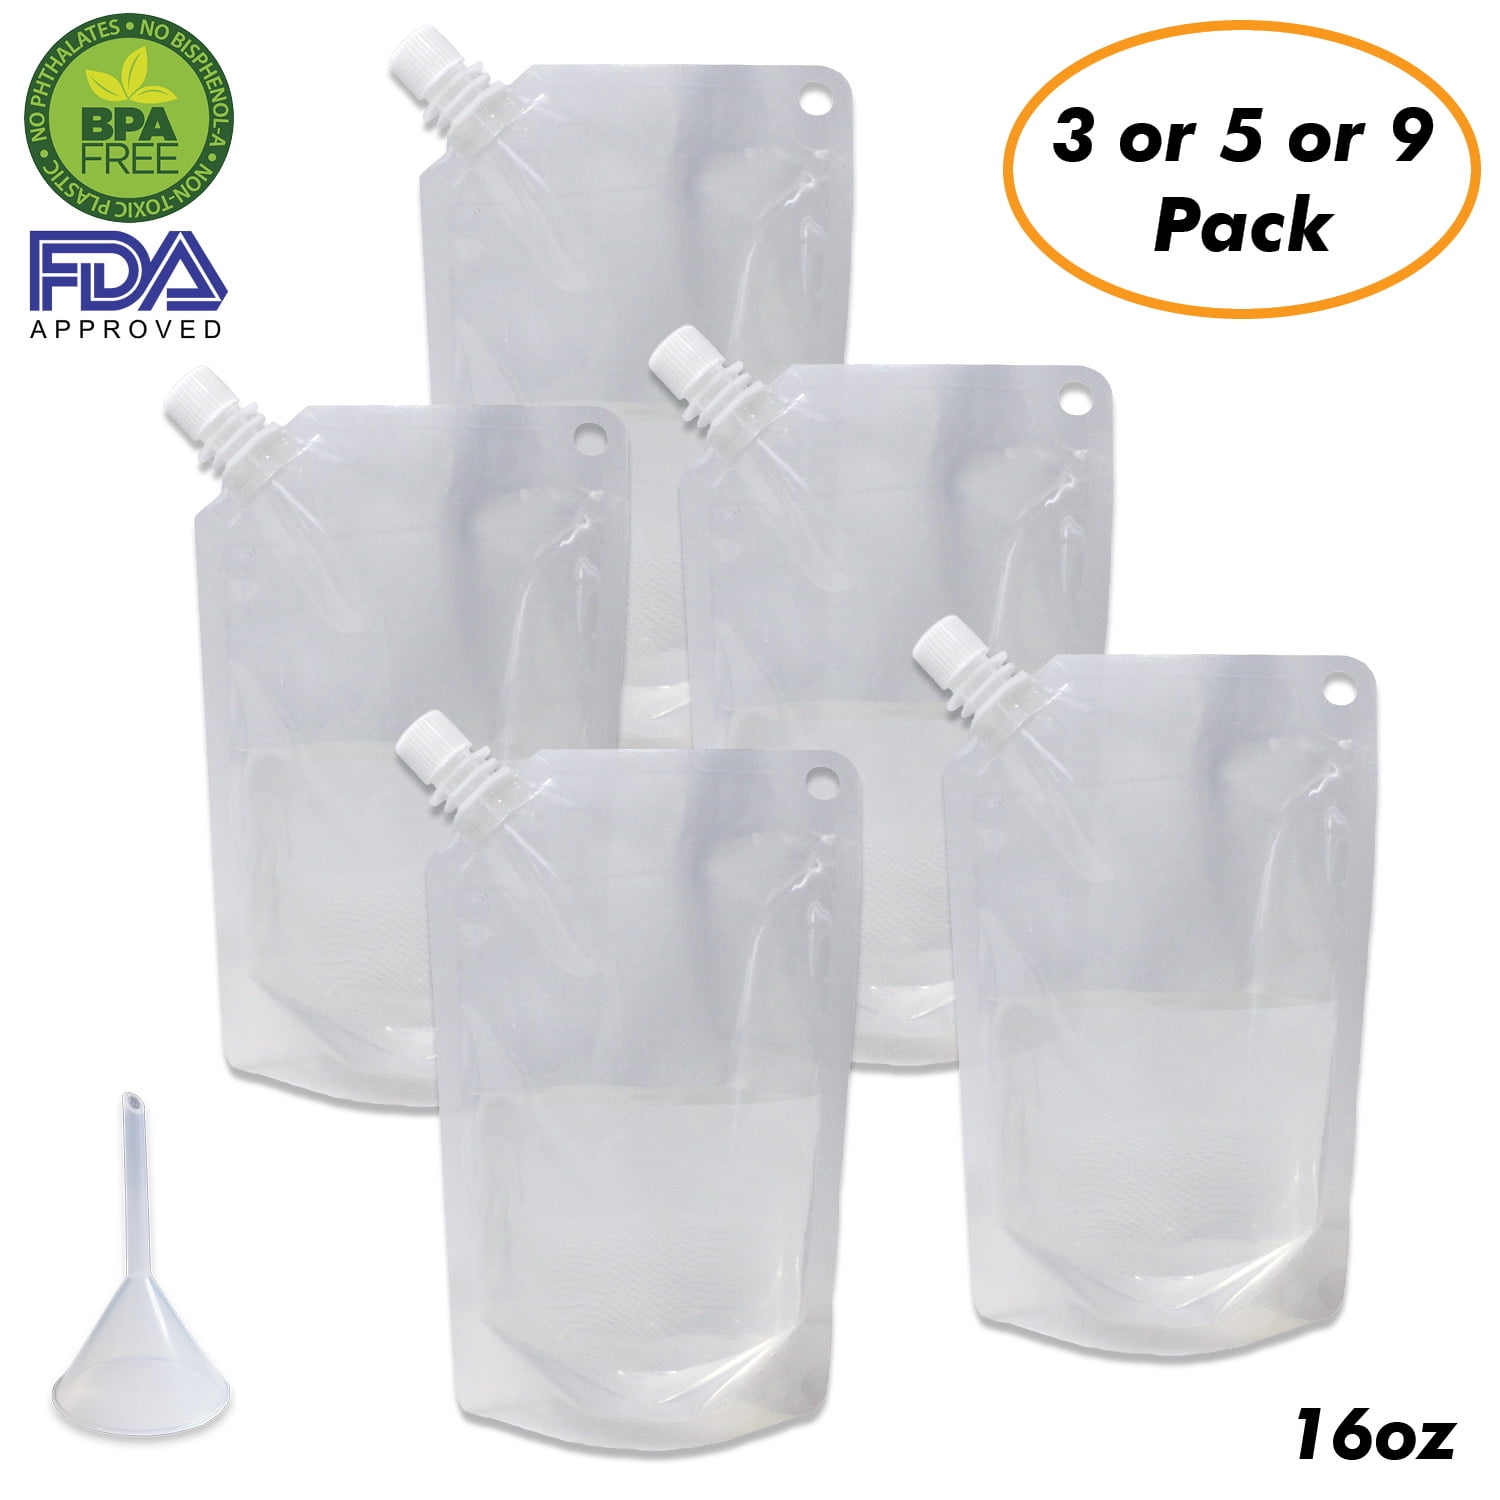 9 Heavy Duty Reusable Plastic Liquor Pouch Concealable Drinking Flask Bag+Funnel